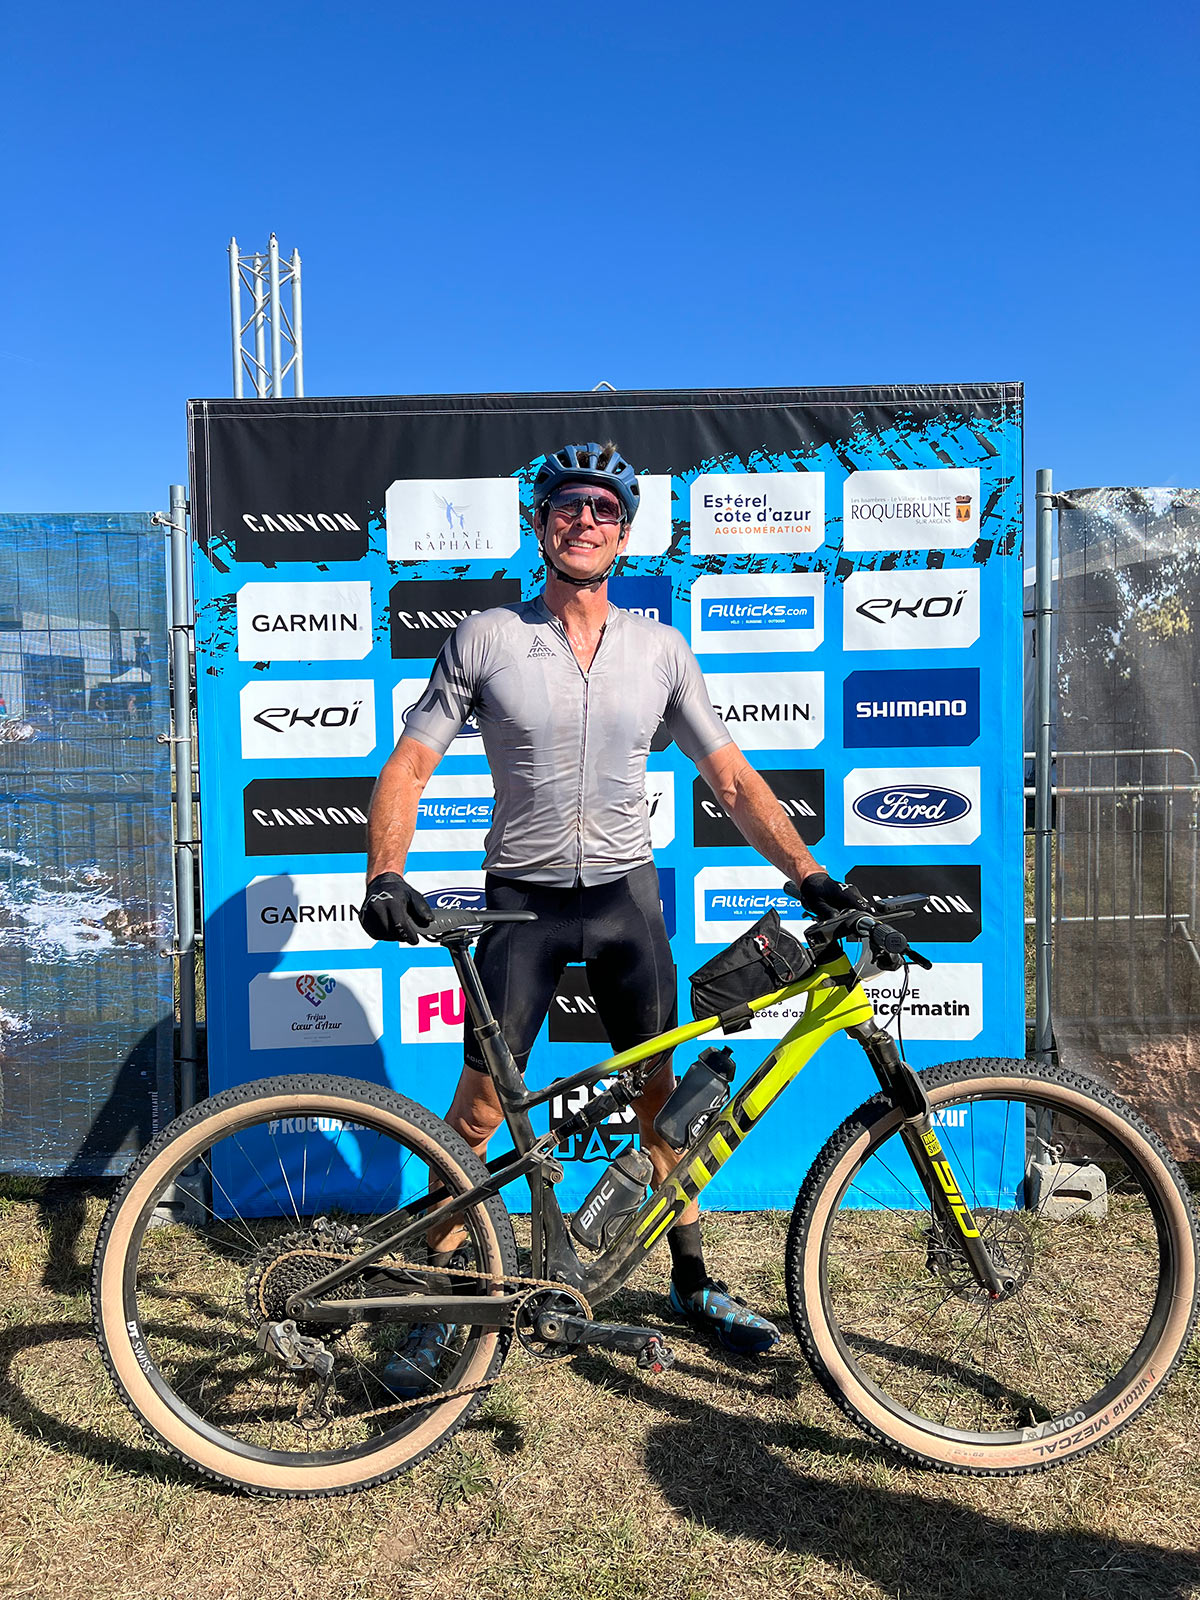 tyler at finish of 2022 Roc D'Azur mountain bike race with new BMC Fourstroke 01